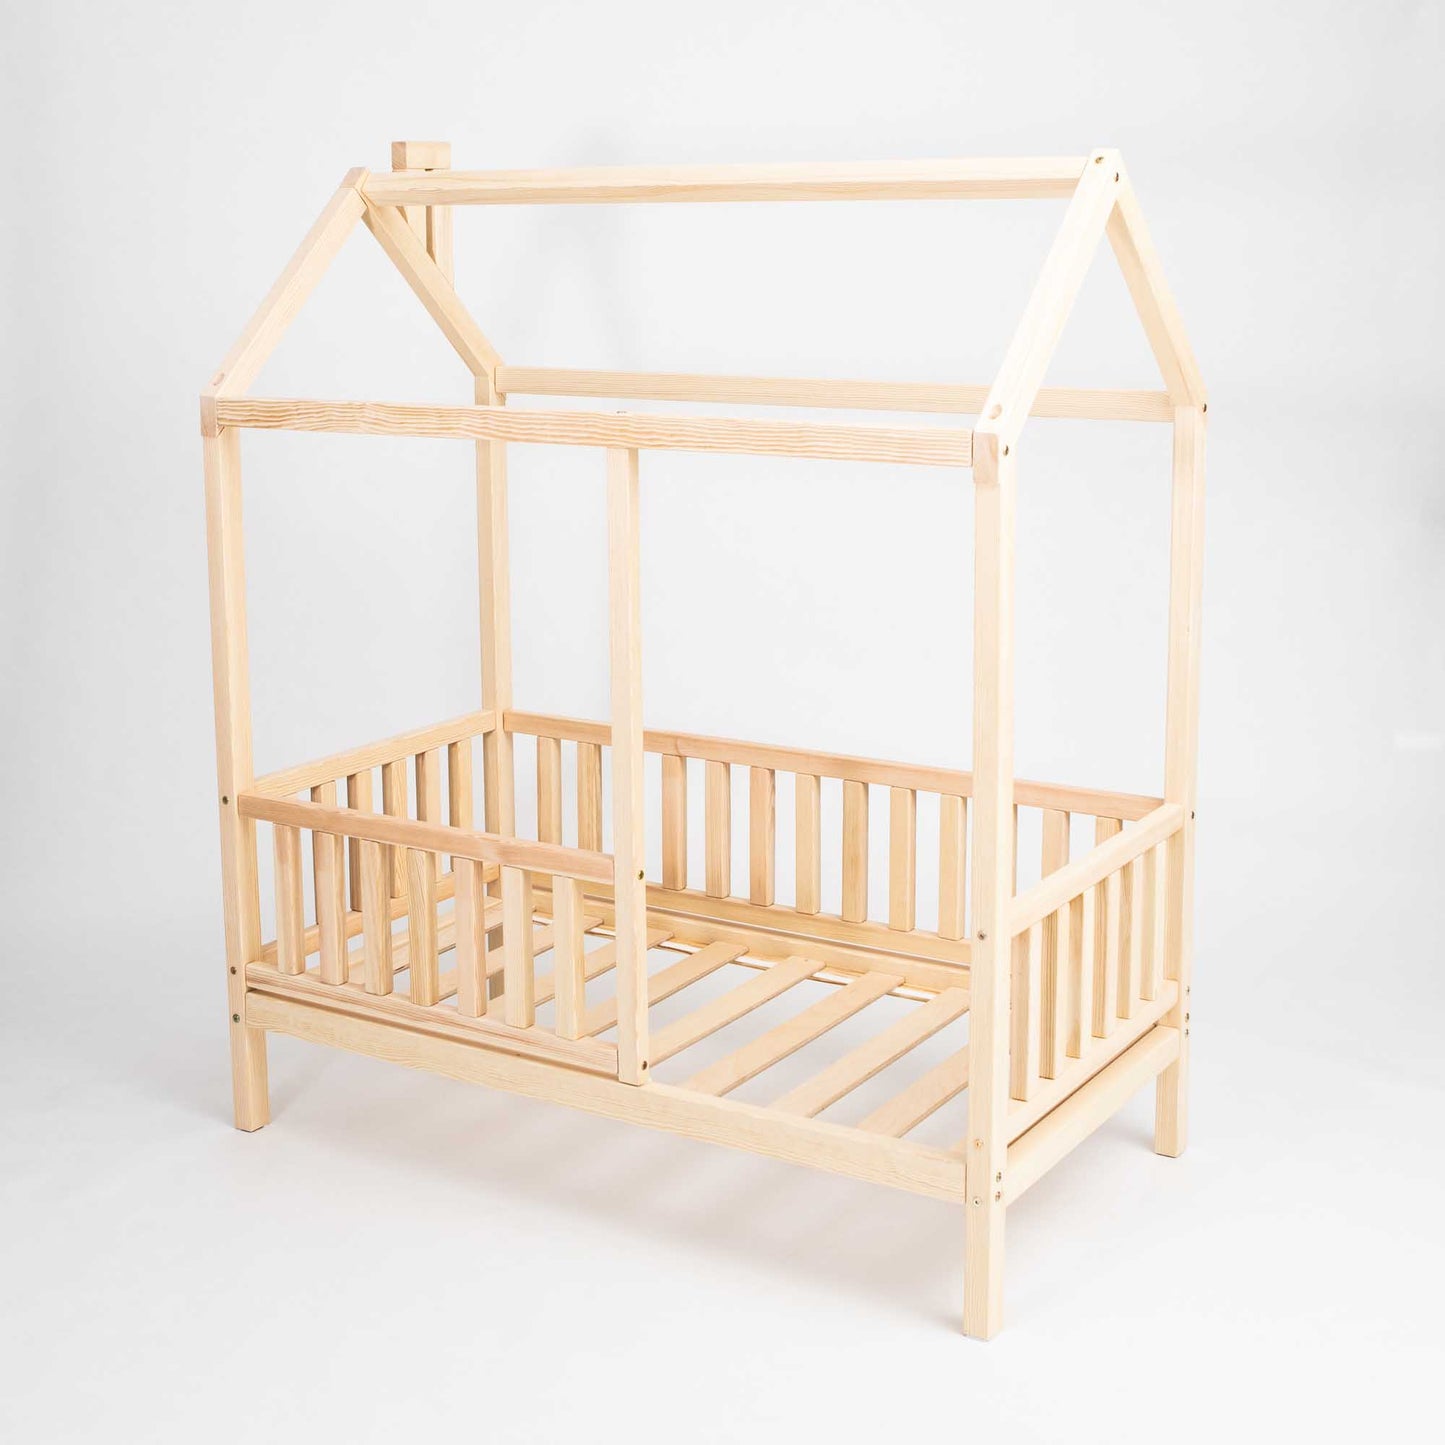 A Kids' house bed on legs with a fence, with a wooden frame and slats, elevated on legs.